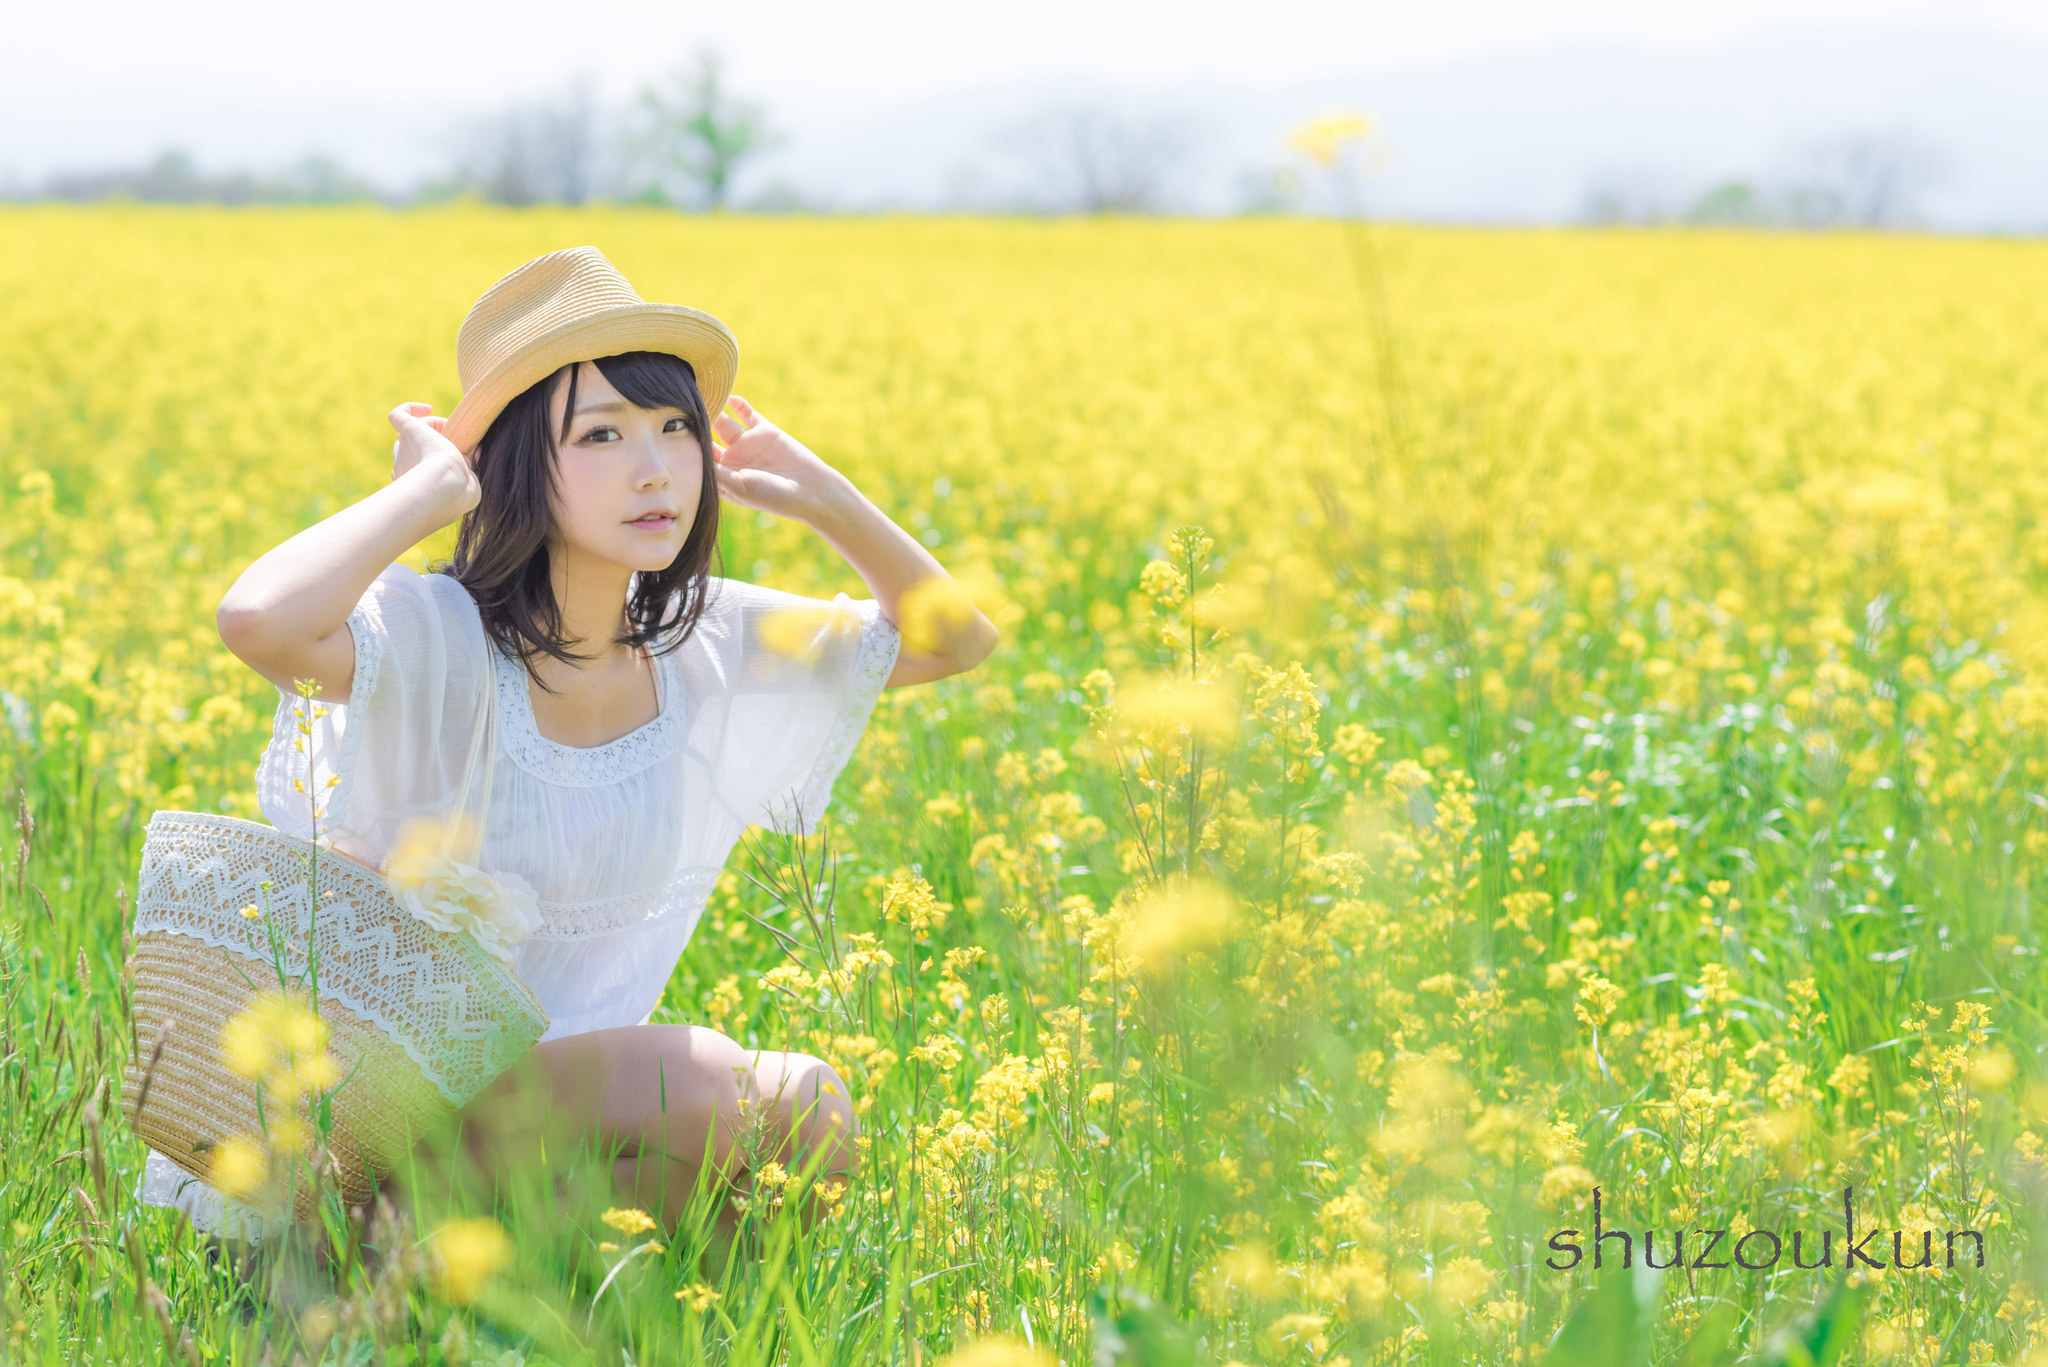 Woman sitting in a field of flowers with a cute basket and hat by shuzoukun